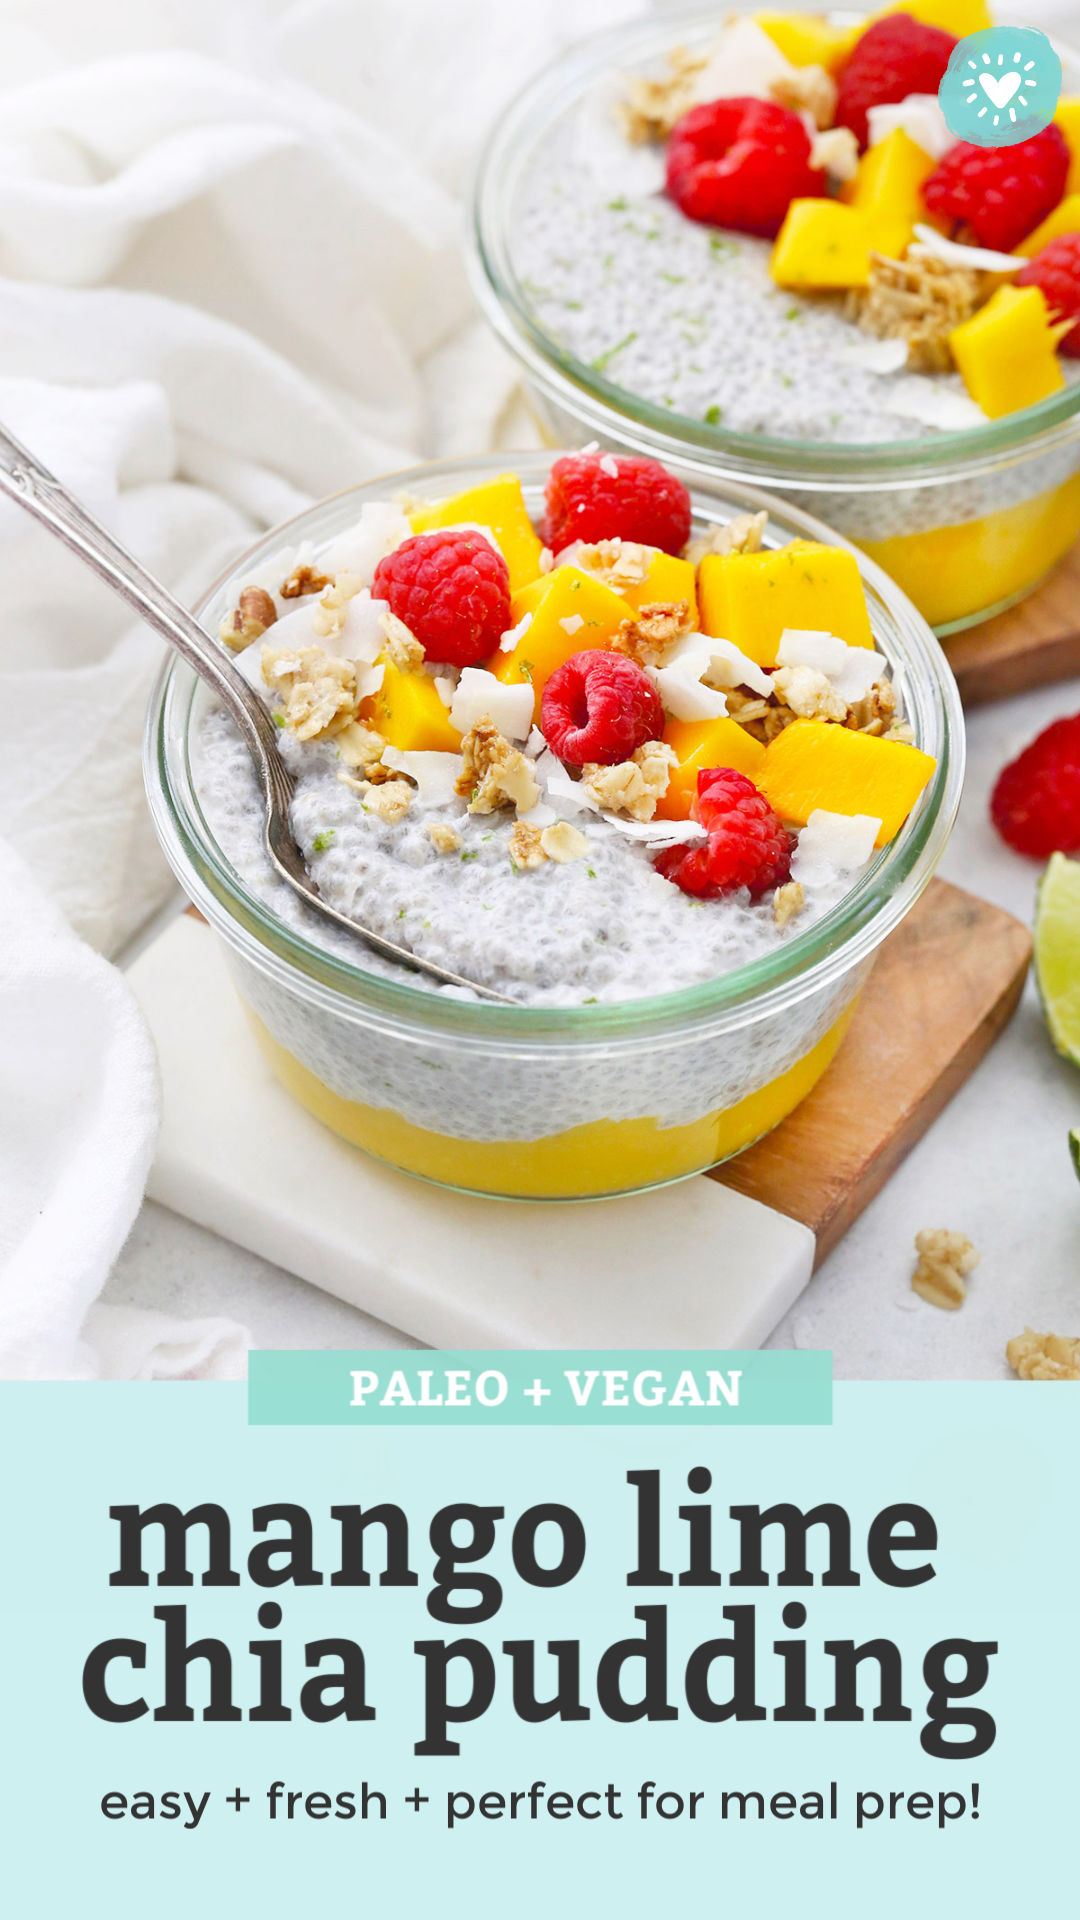 Front View of Jars of Mango Chia Pudding Topped with Raspberries, Granola, and Fresh Mango with text that reads "Paleo & Vegan Mango Lime Chia Pudding. Easy + Fresh + Perfect for meal prep!"